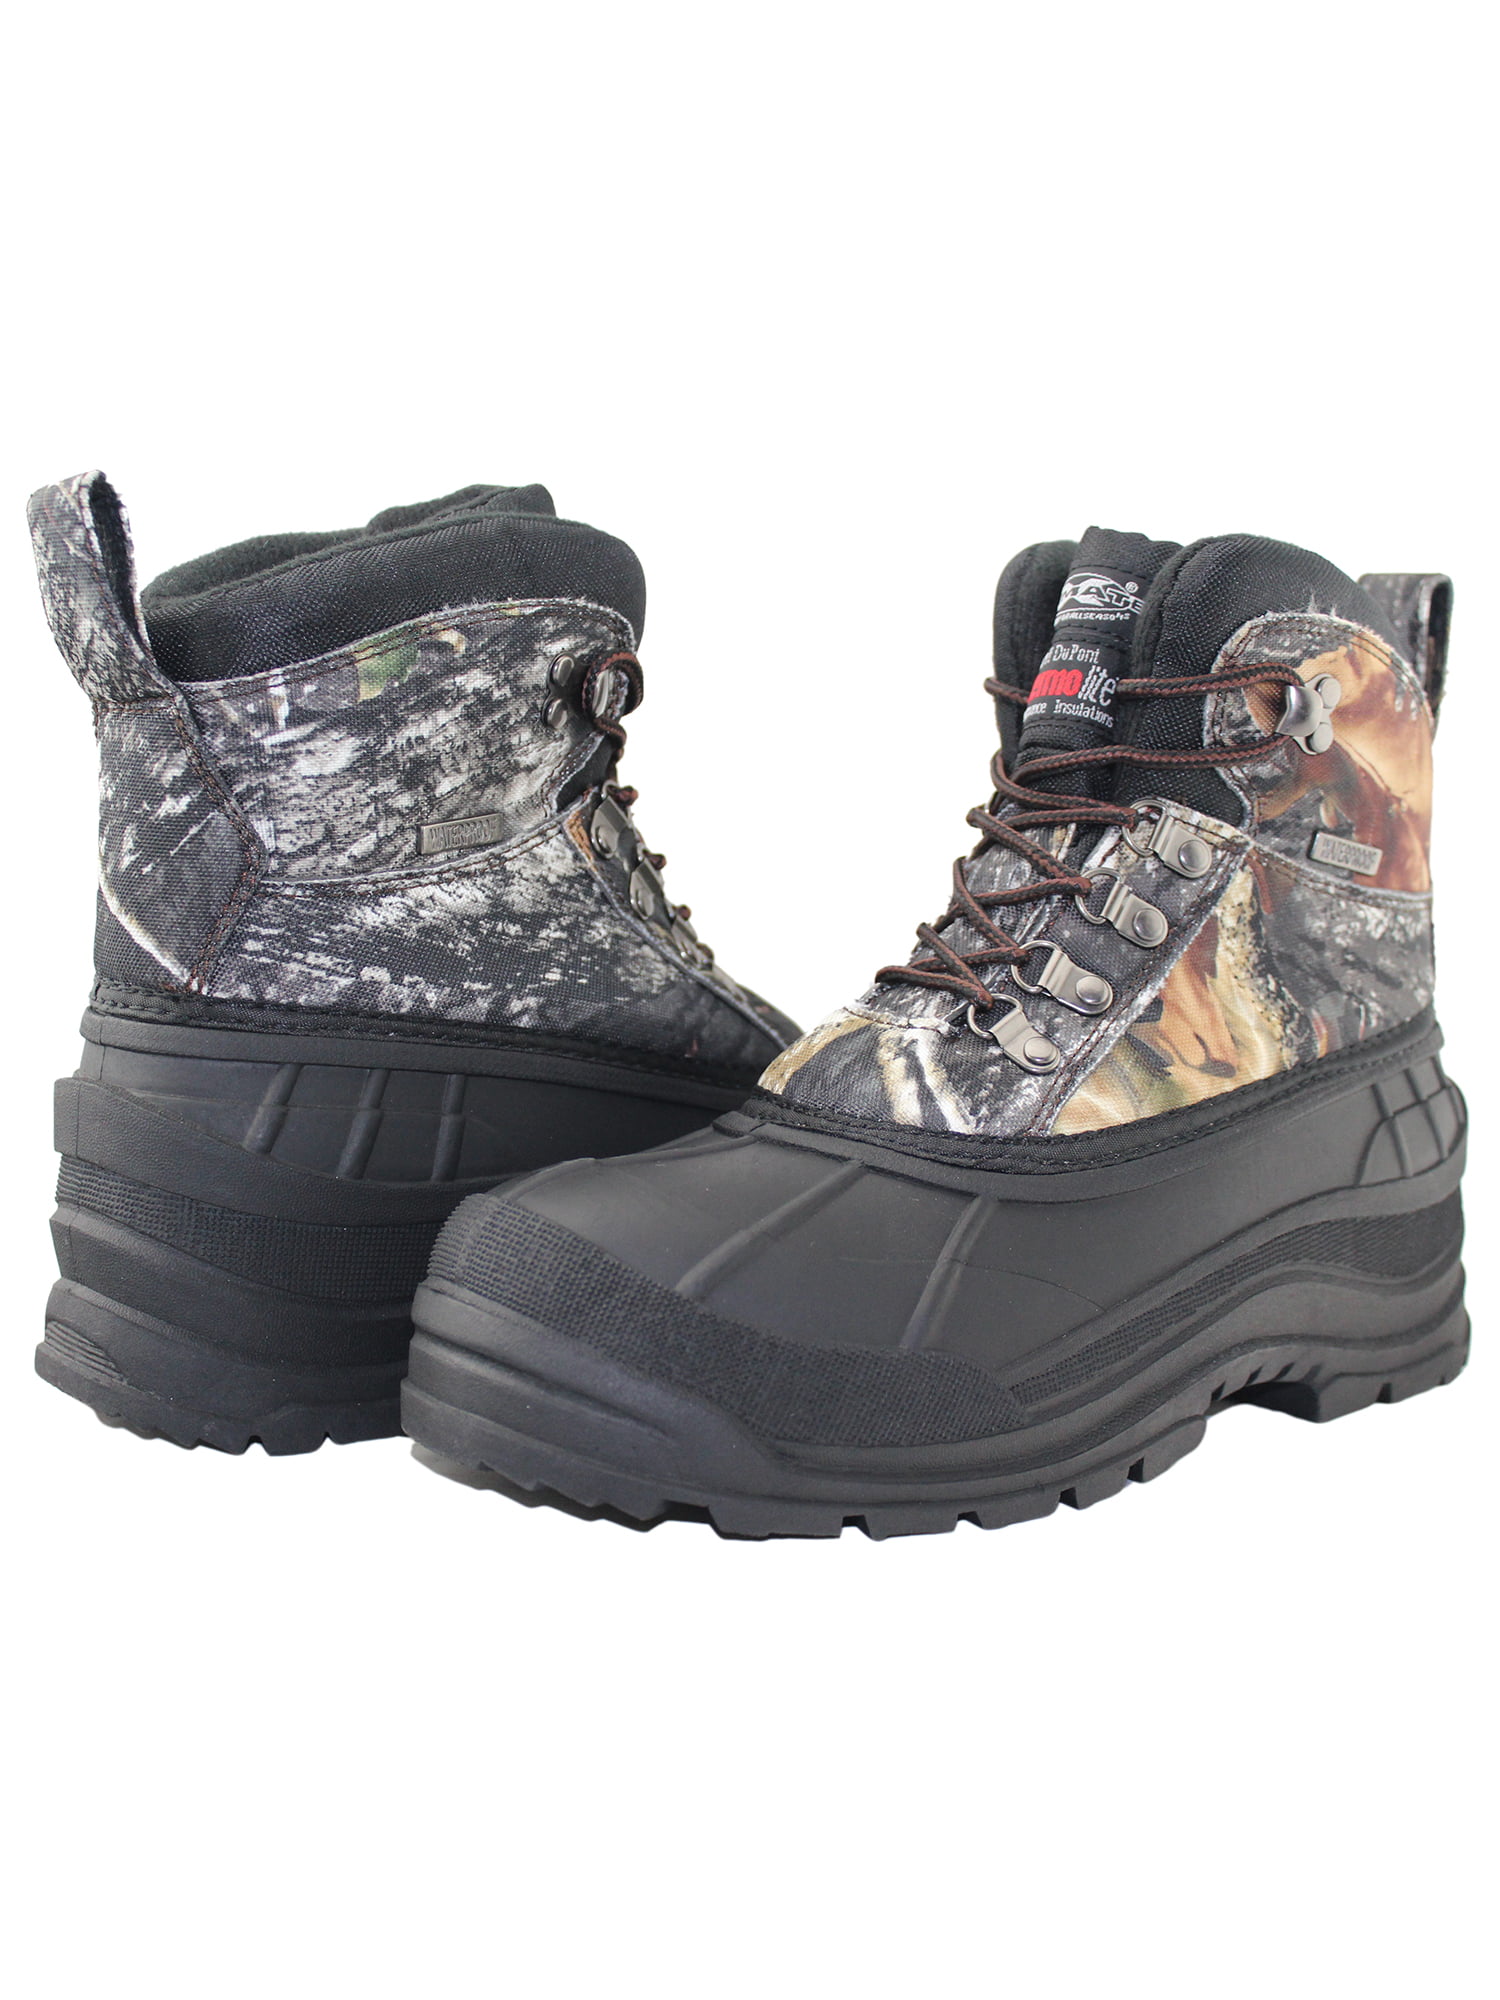 Men's Winter Snow Boots Camouflage Waterproof Insulated Hunting Hiking Shoes New